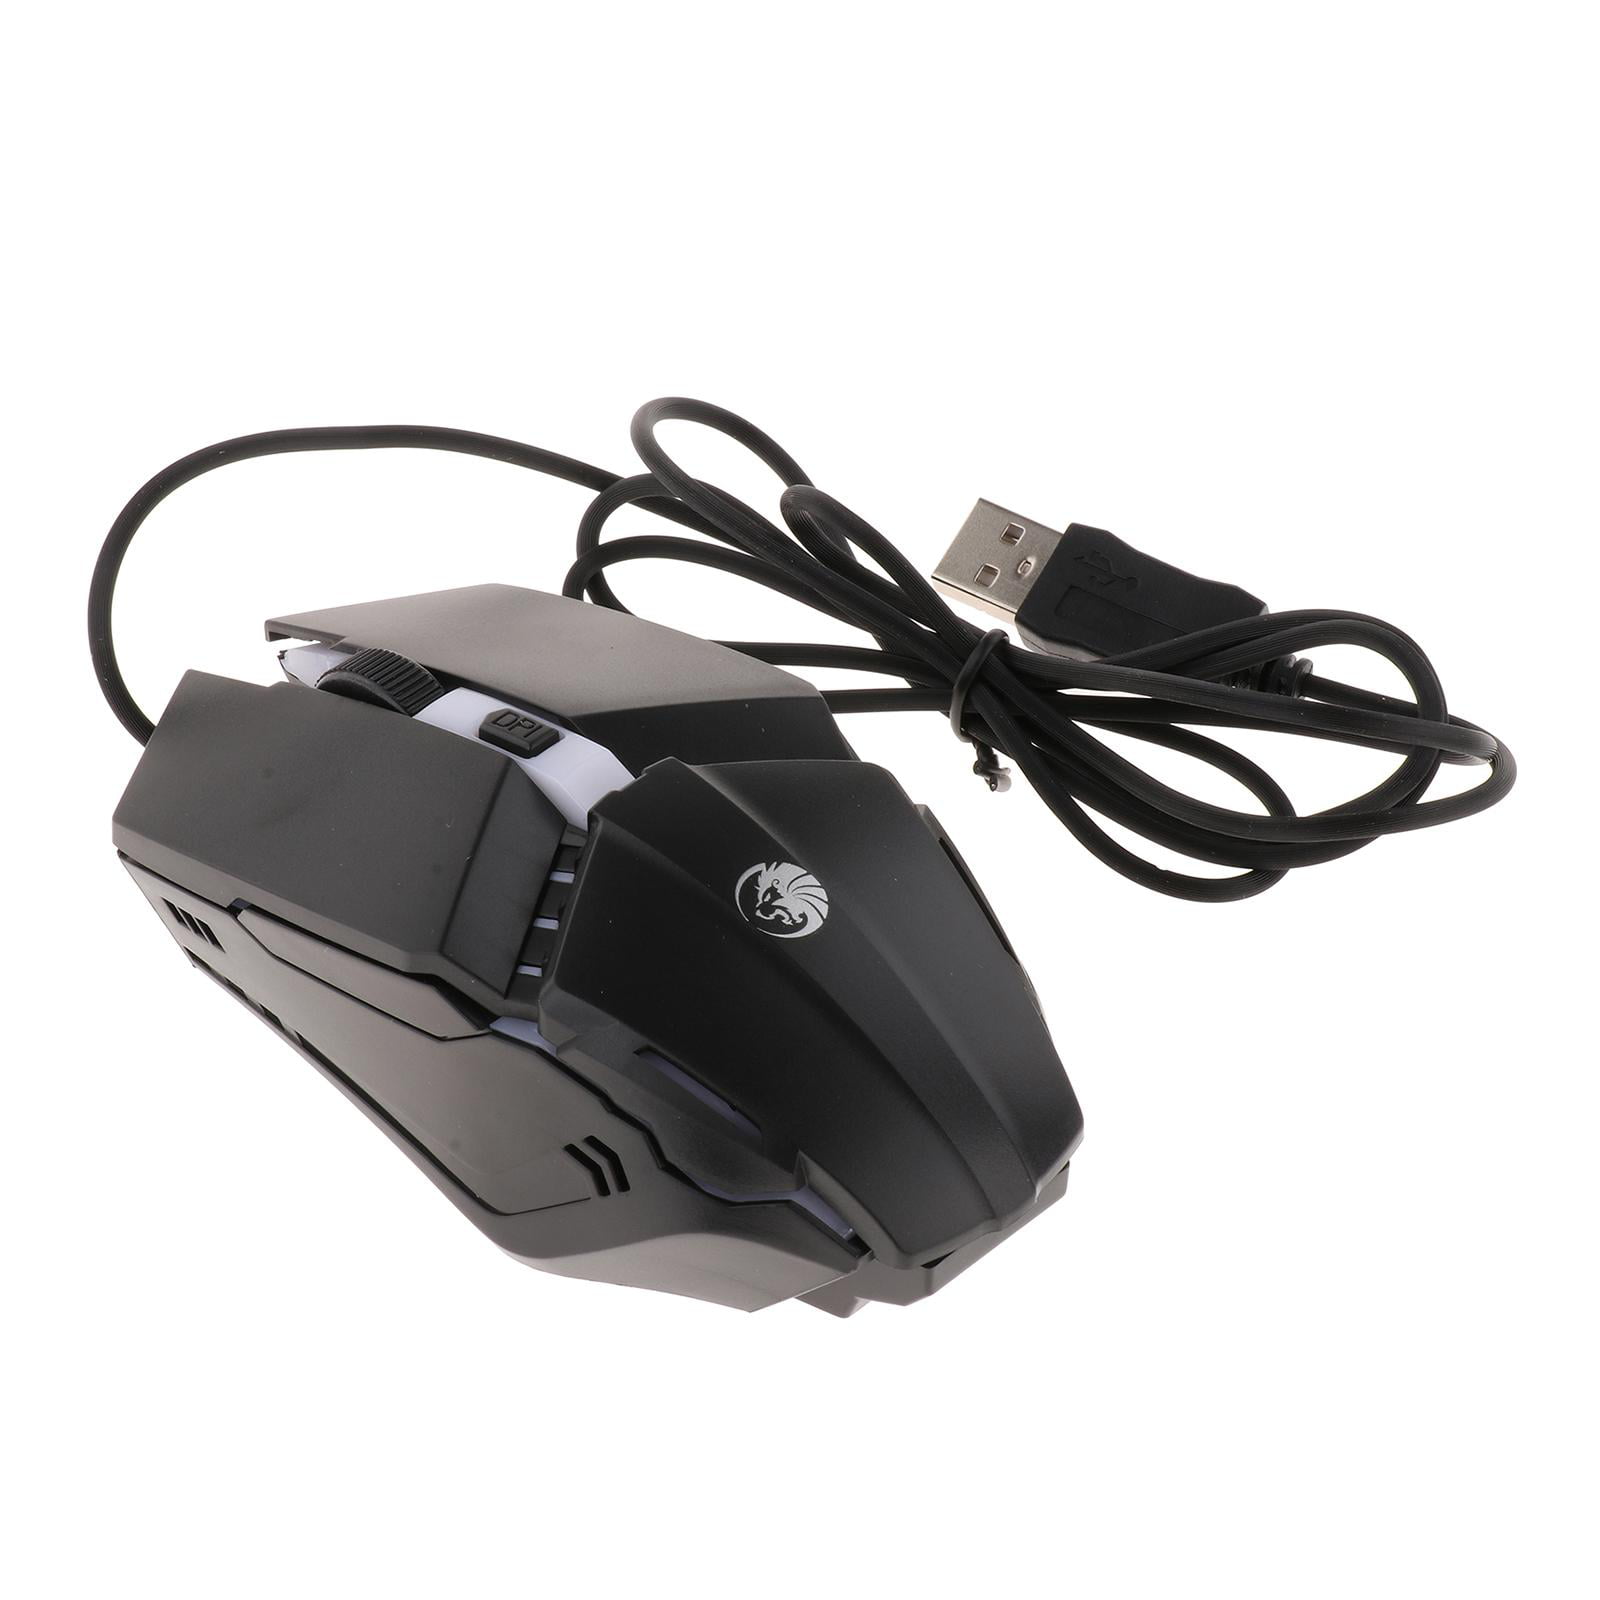 Homyl G3SE 1600DPI Computer 4 Button Wired Gaming Mouse LED Optical Game Mice Black